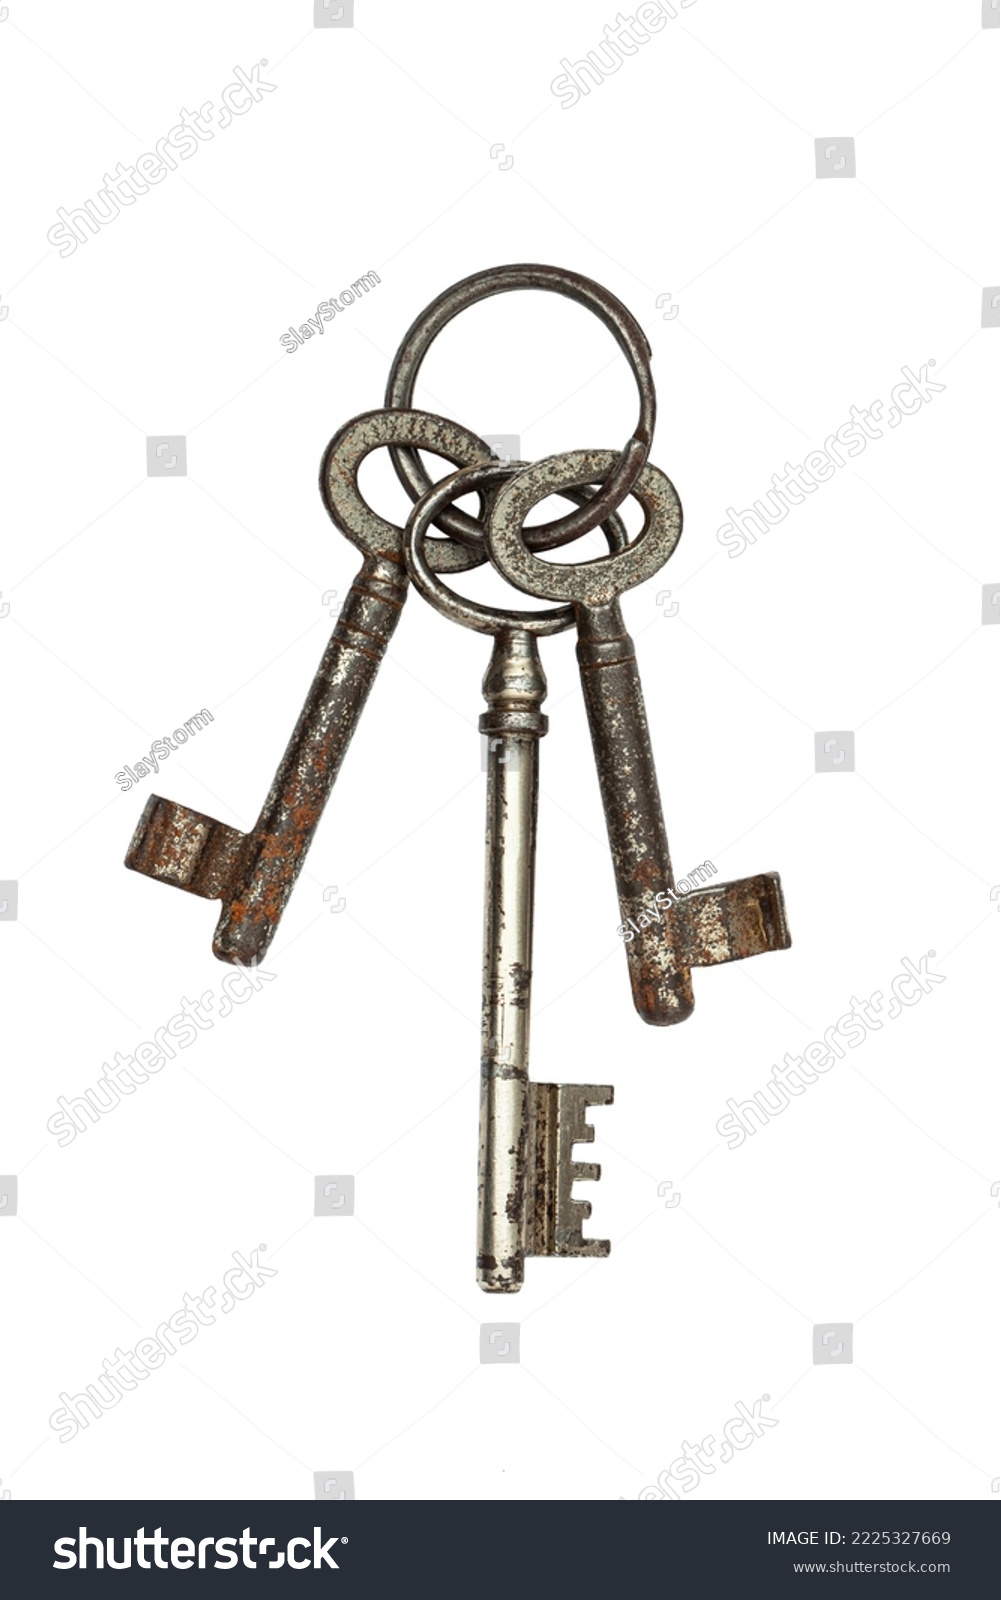 Bunch of old vintage keys isolated on white background. Safety and security concept. #2225327669